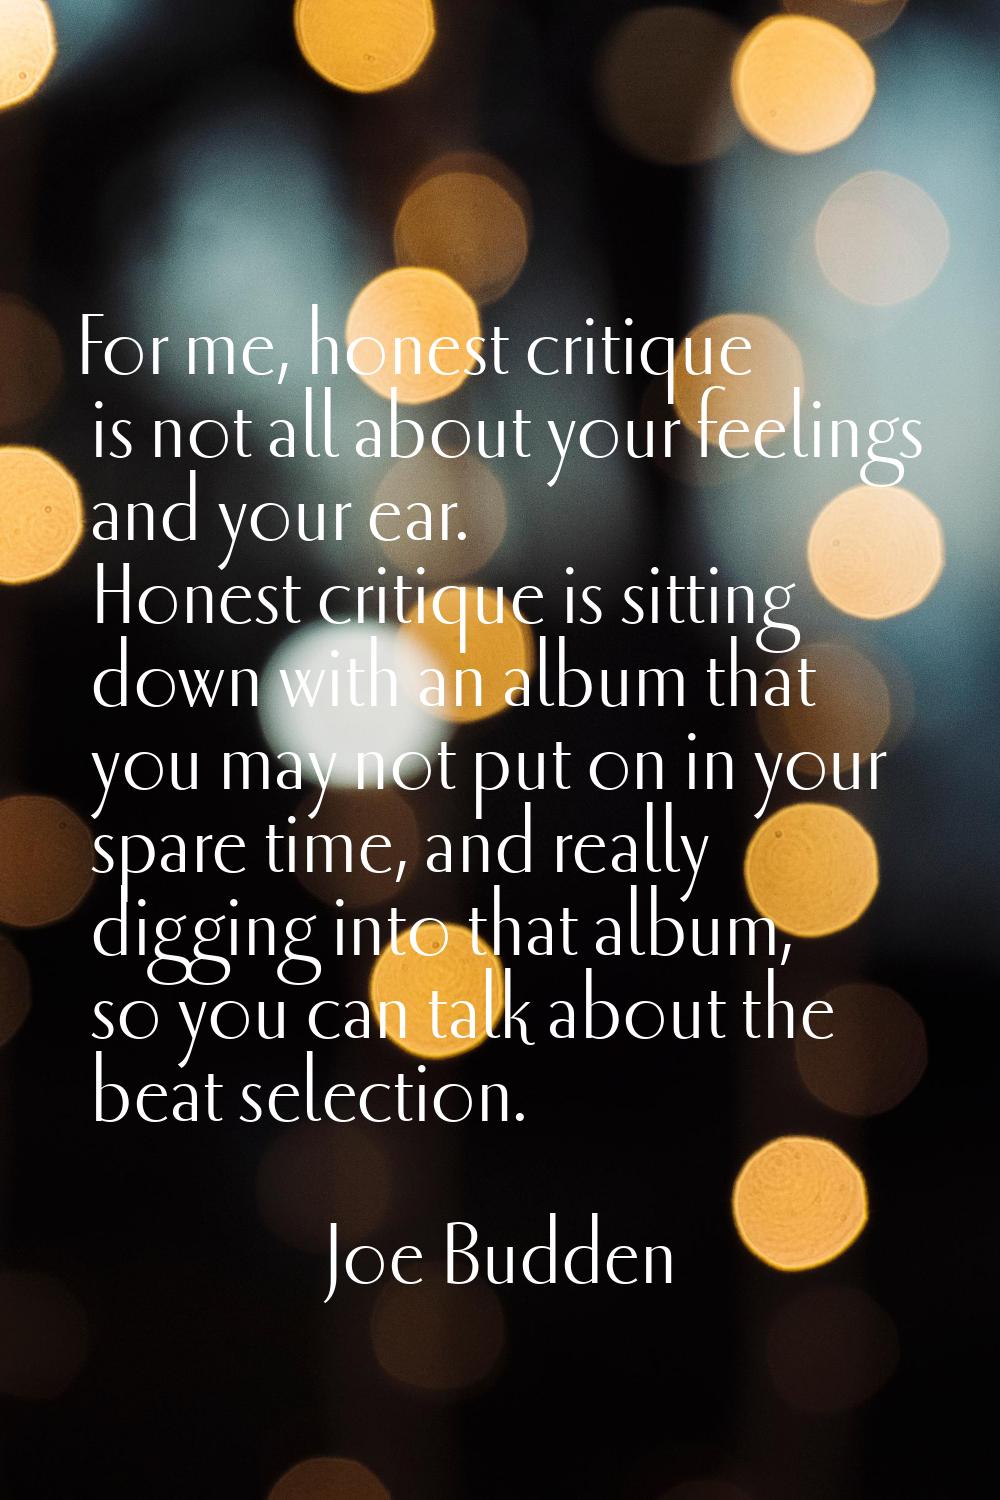 For me, honest critique is not all about your feelings and your ear. Honest critique is sitting dow